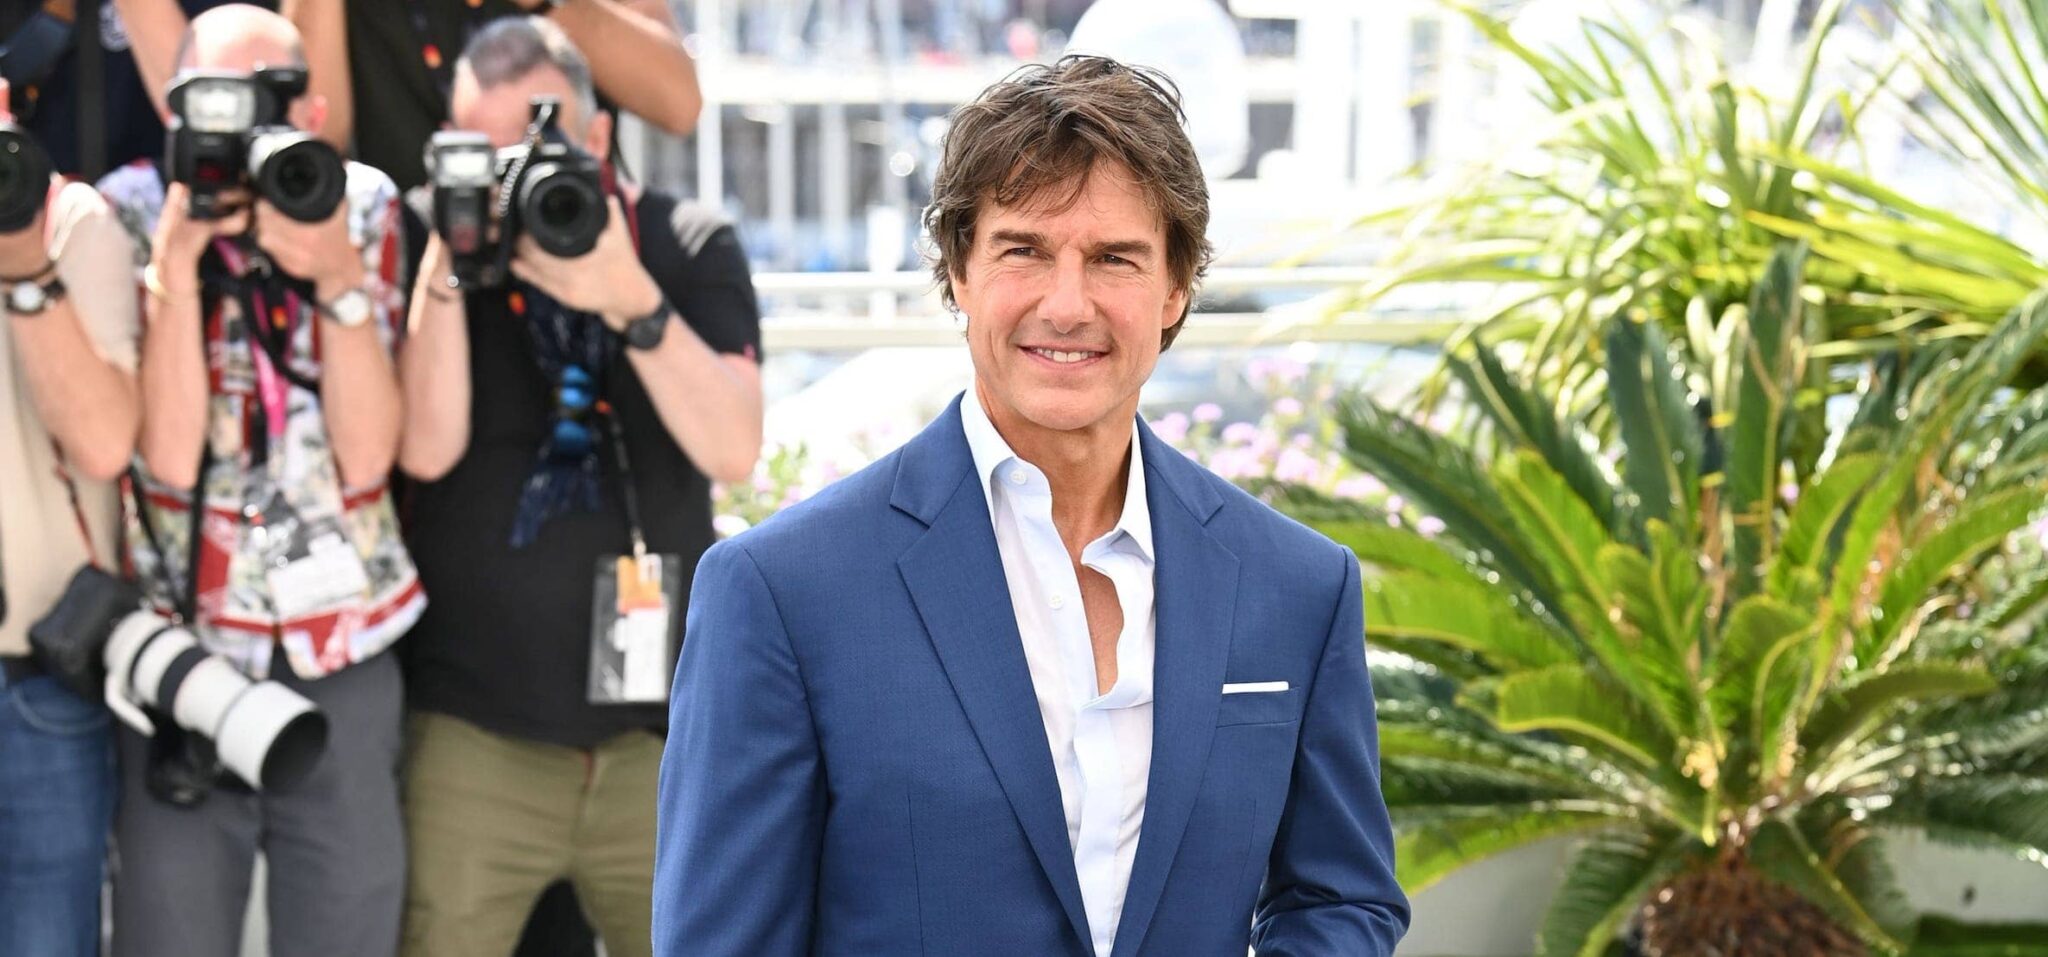 Tom cruise at premiere